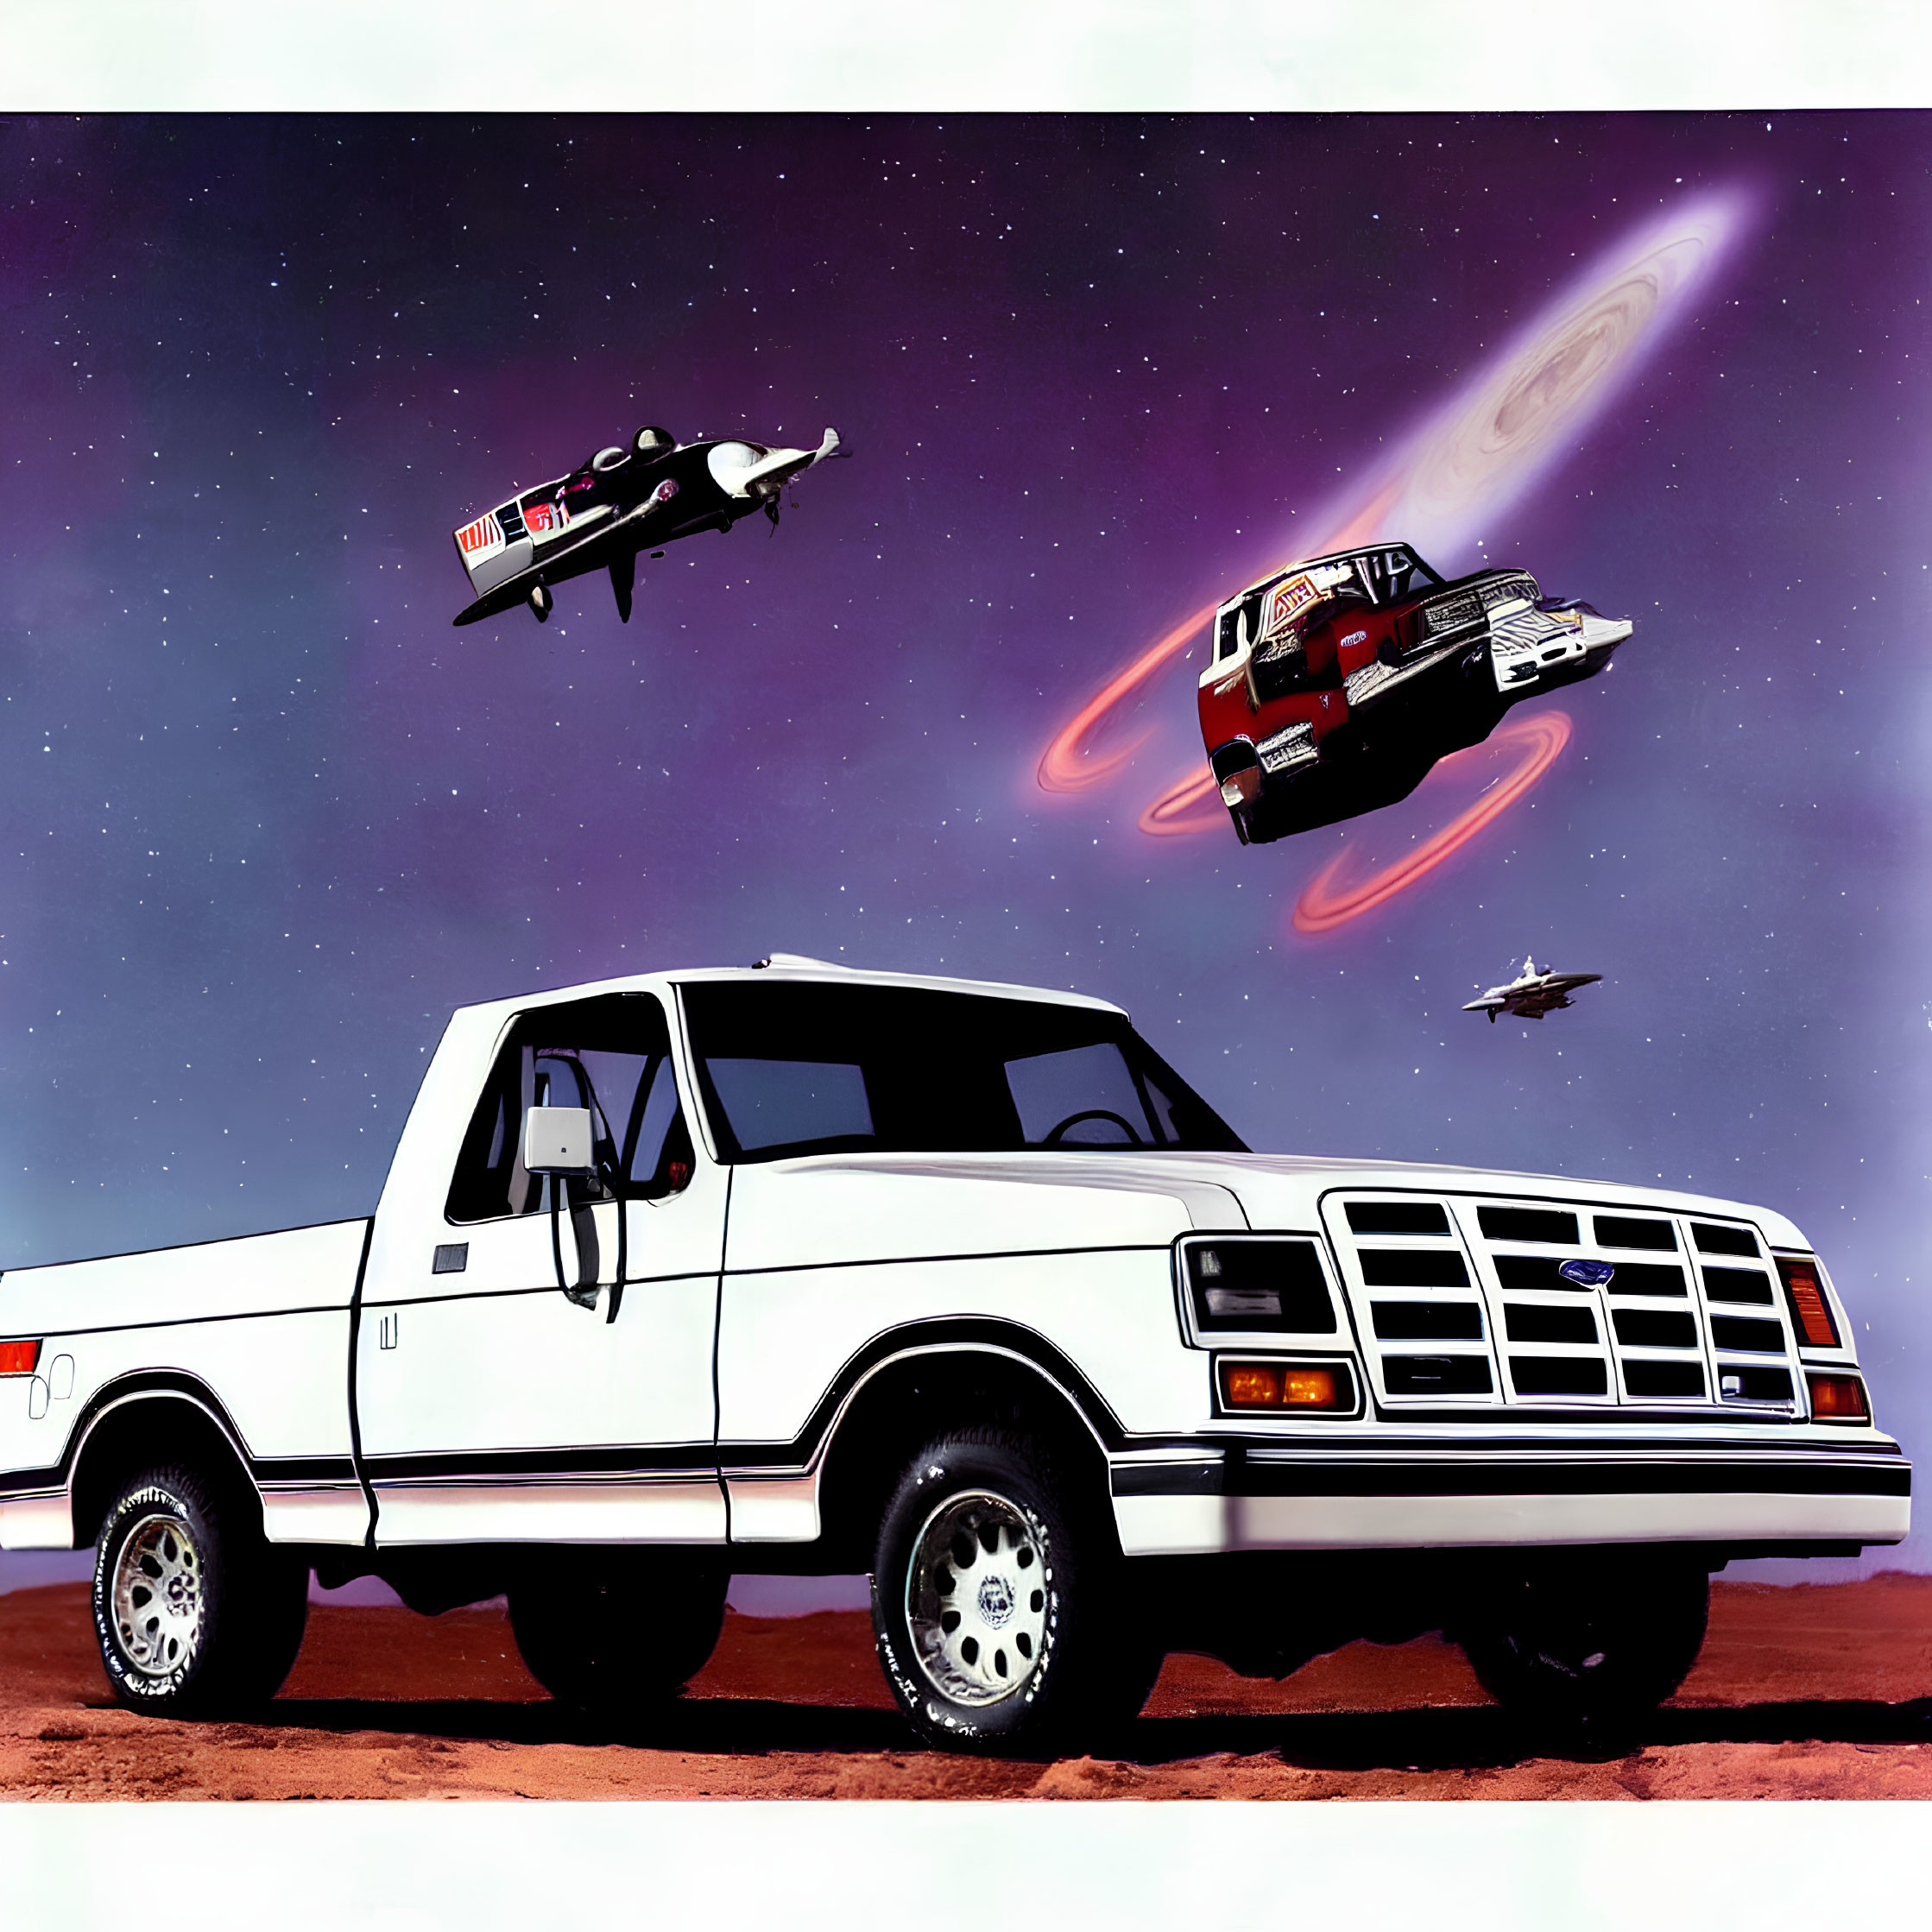 White Pickup Truck in Desert with Space Fighters Soaring